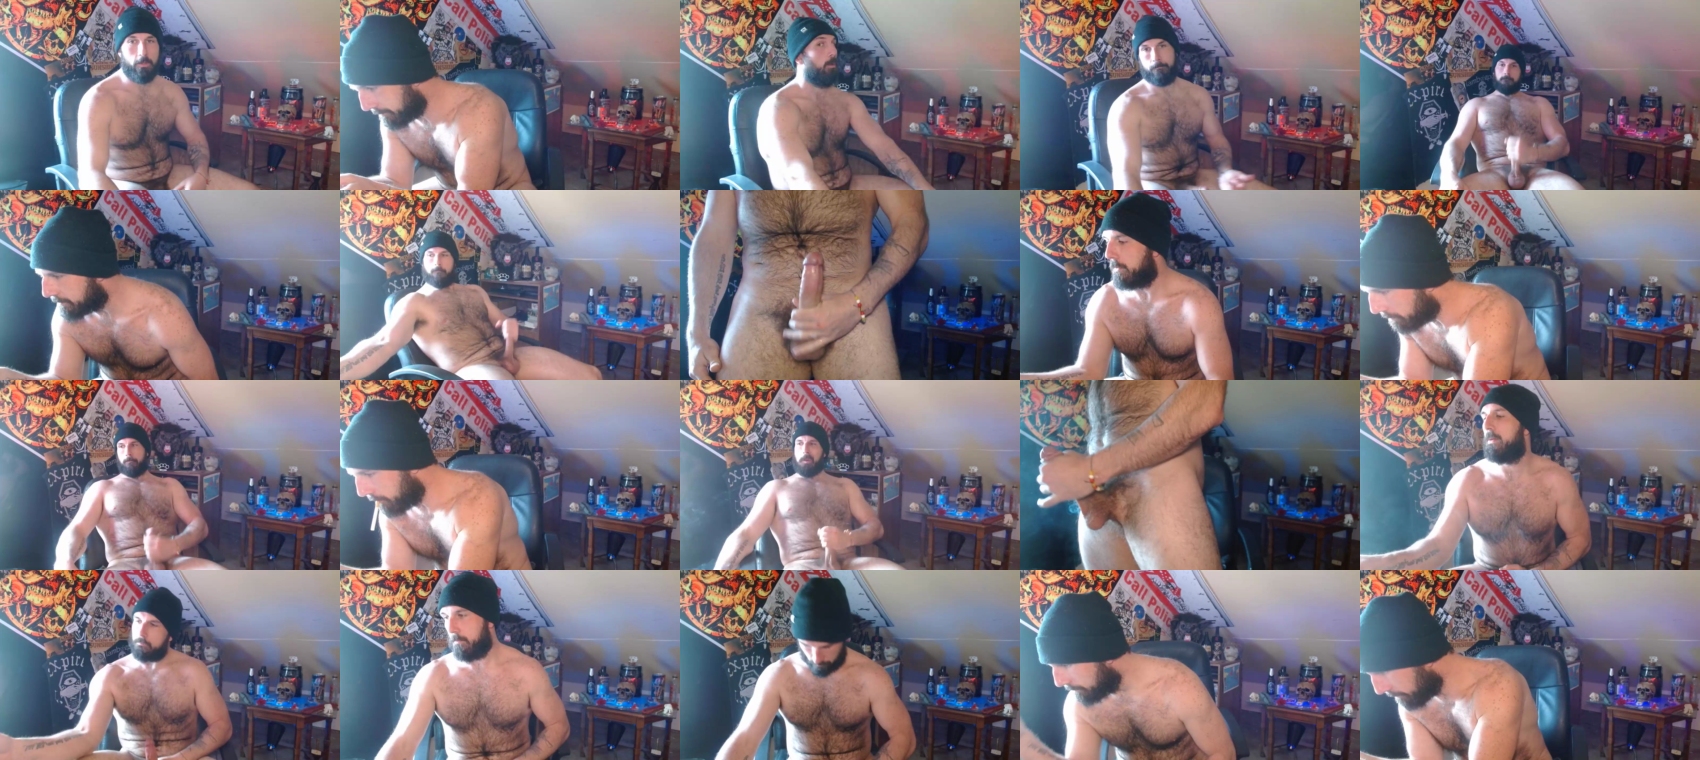 chewy1lb Video CAM SHOW @ Chaturbate 30-03-2022